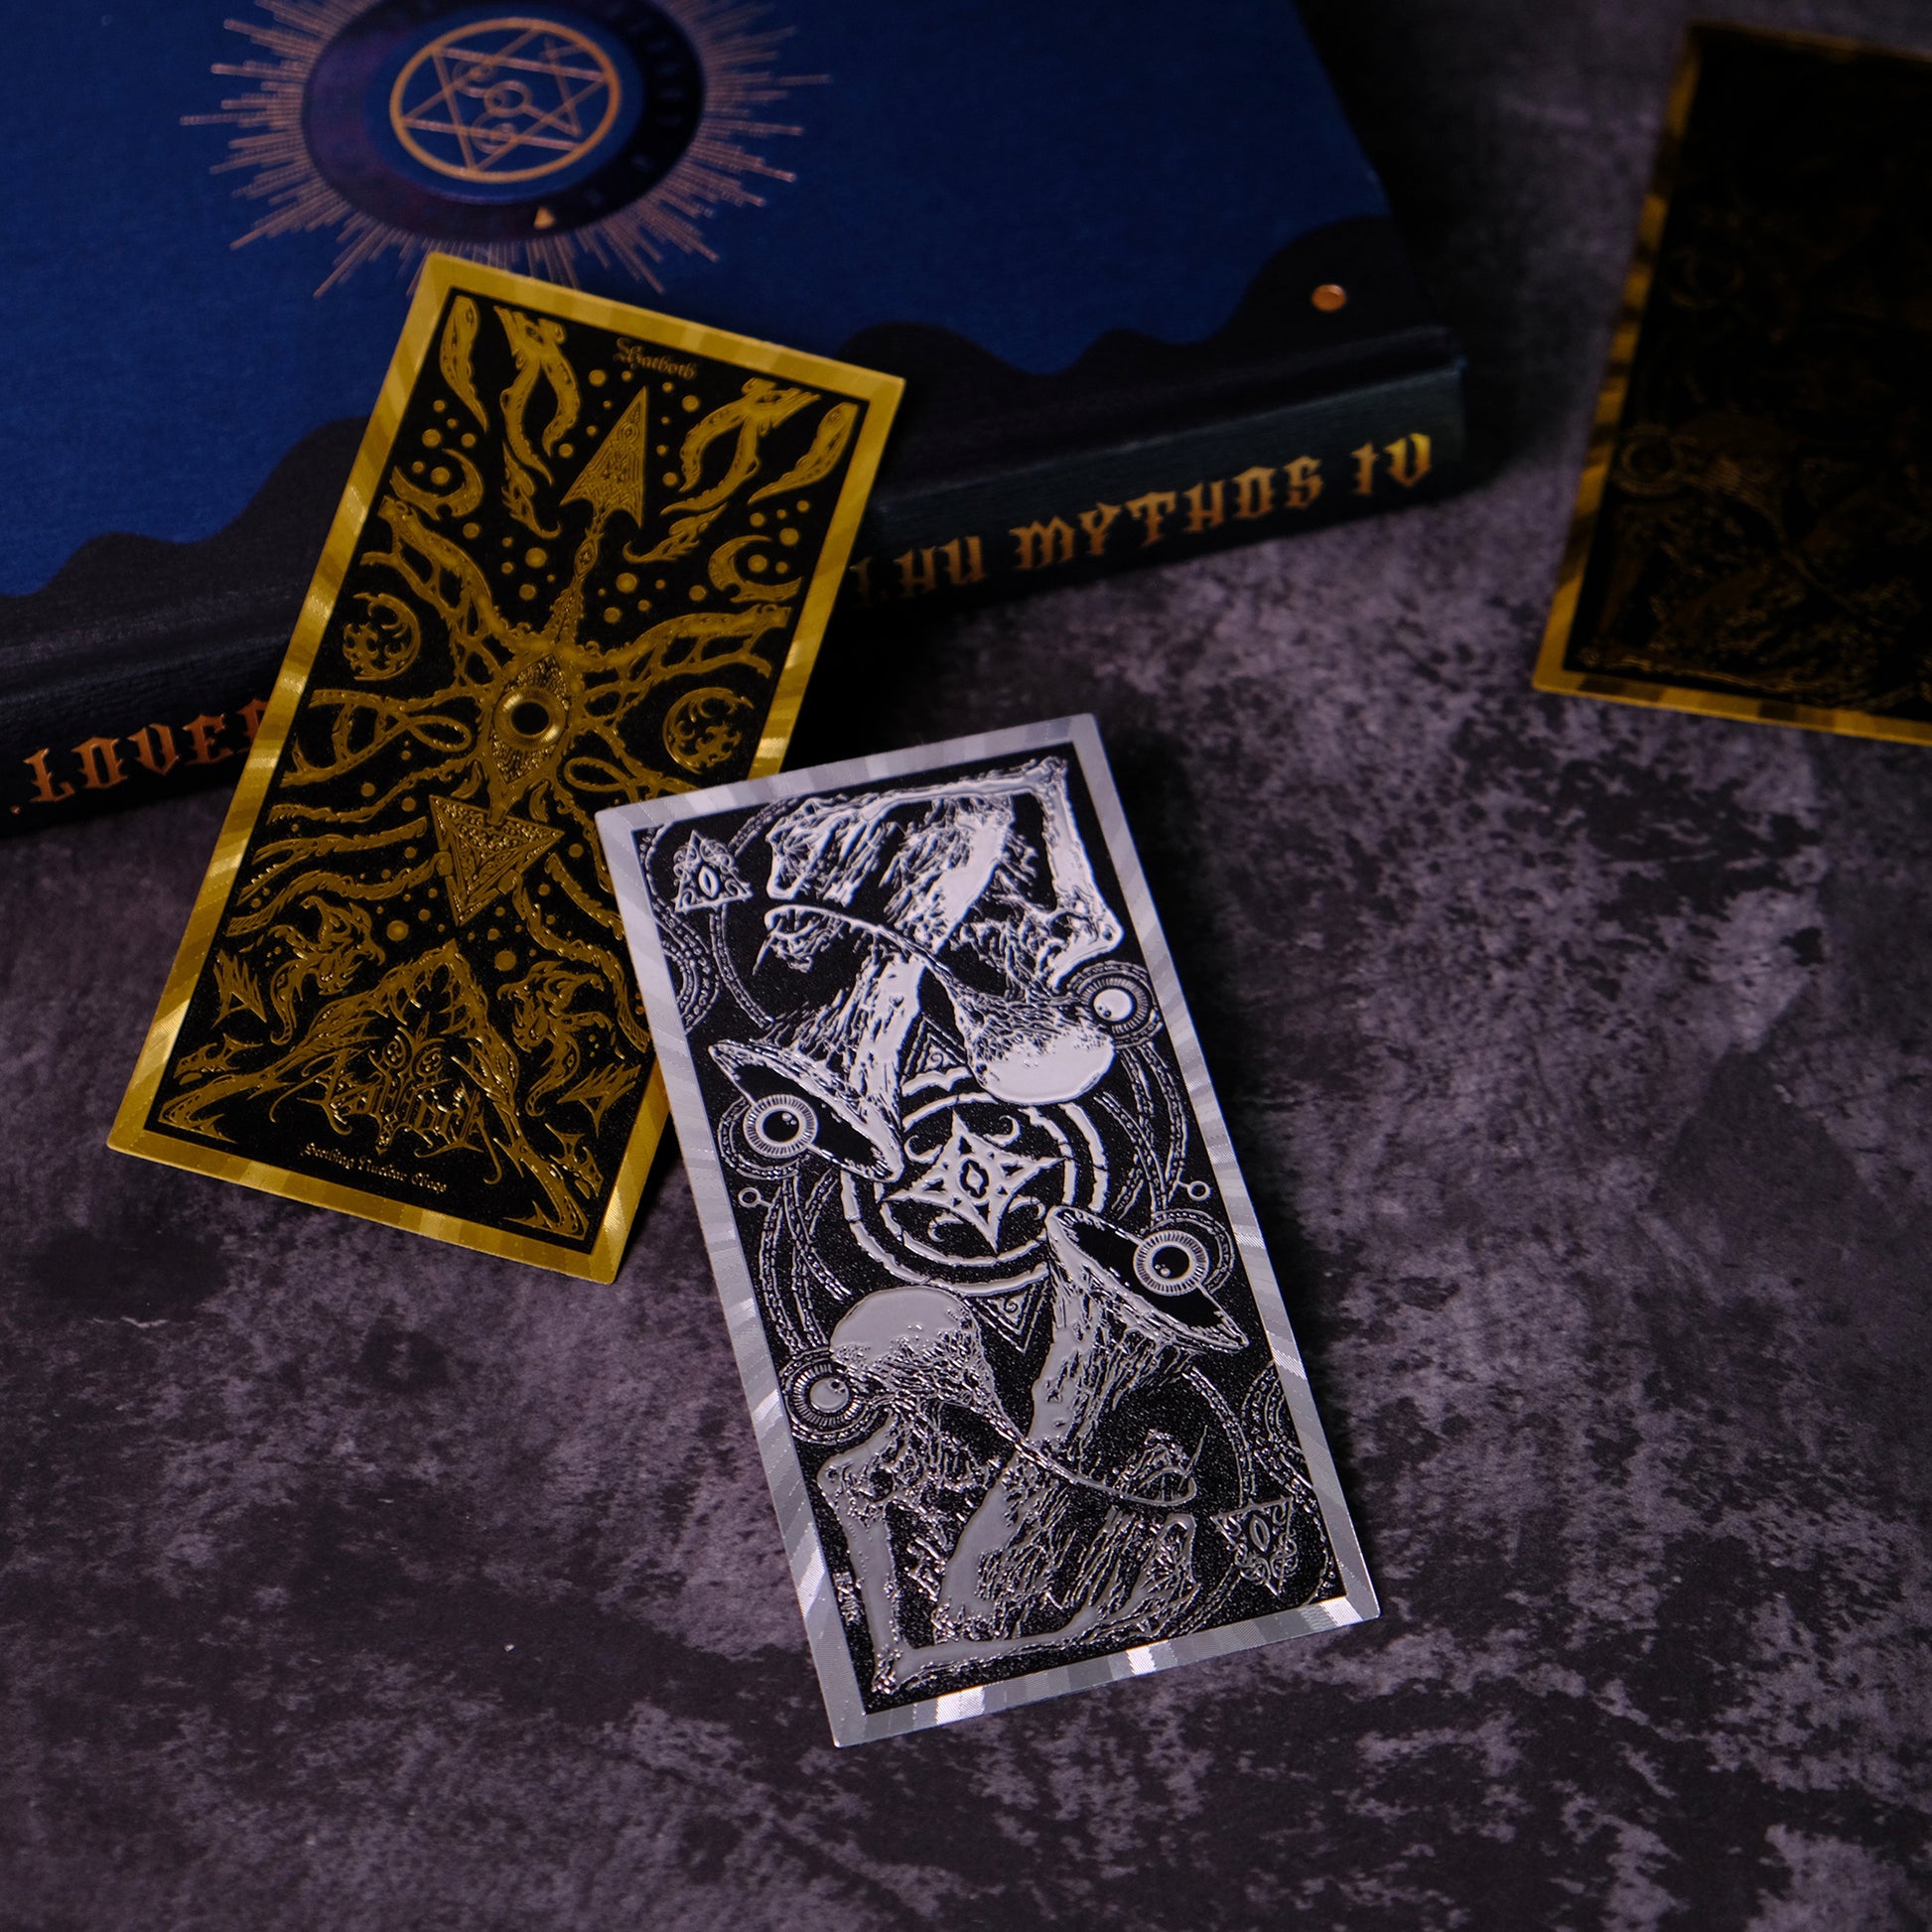 Bookworms from Shaggai Cthulhu Metal Book Corners – Vermilion